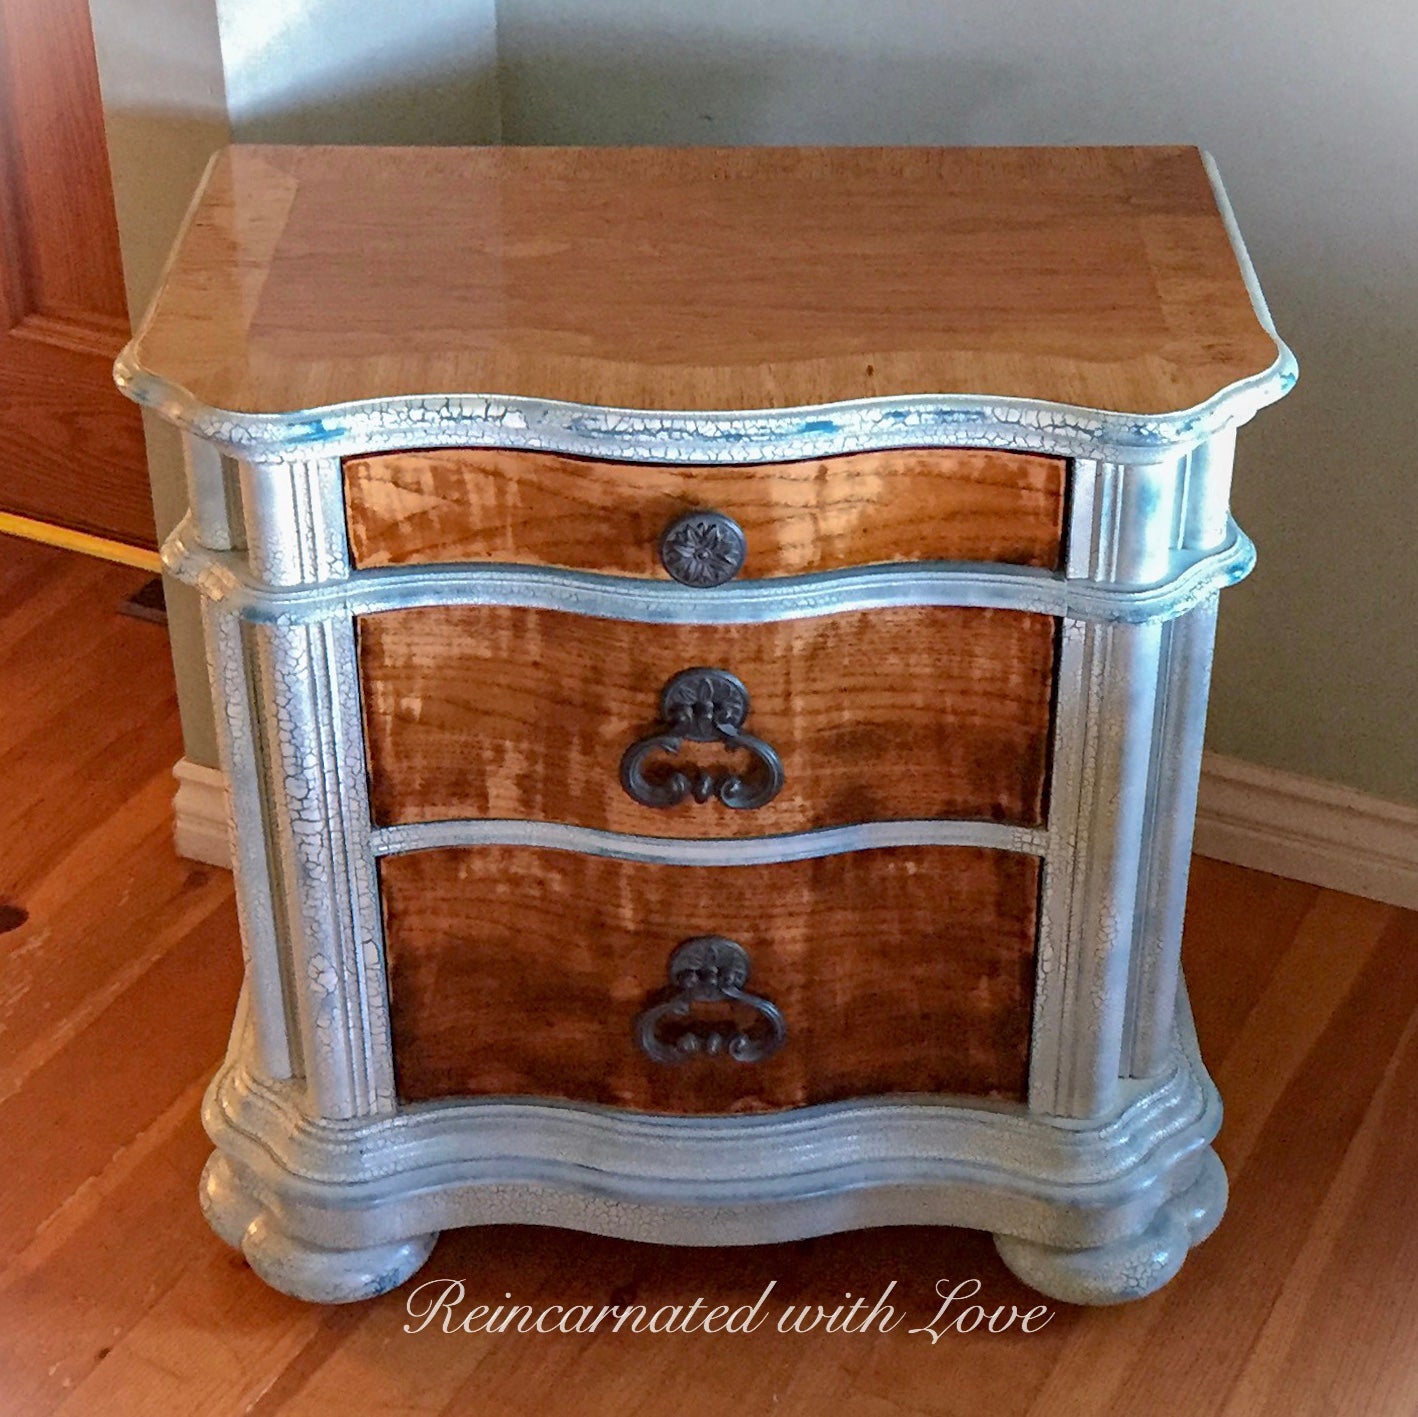 Farmhouse nightstand with three large drawers, done in a shabby chic, white finish with stained wood tabletop & drawer faces.